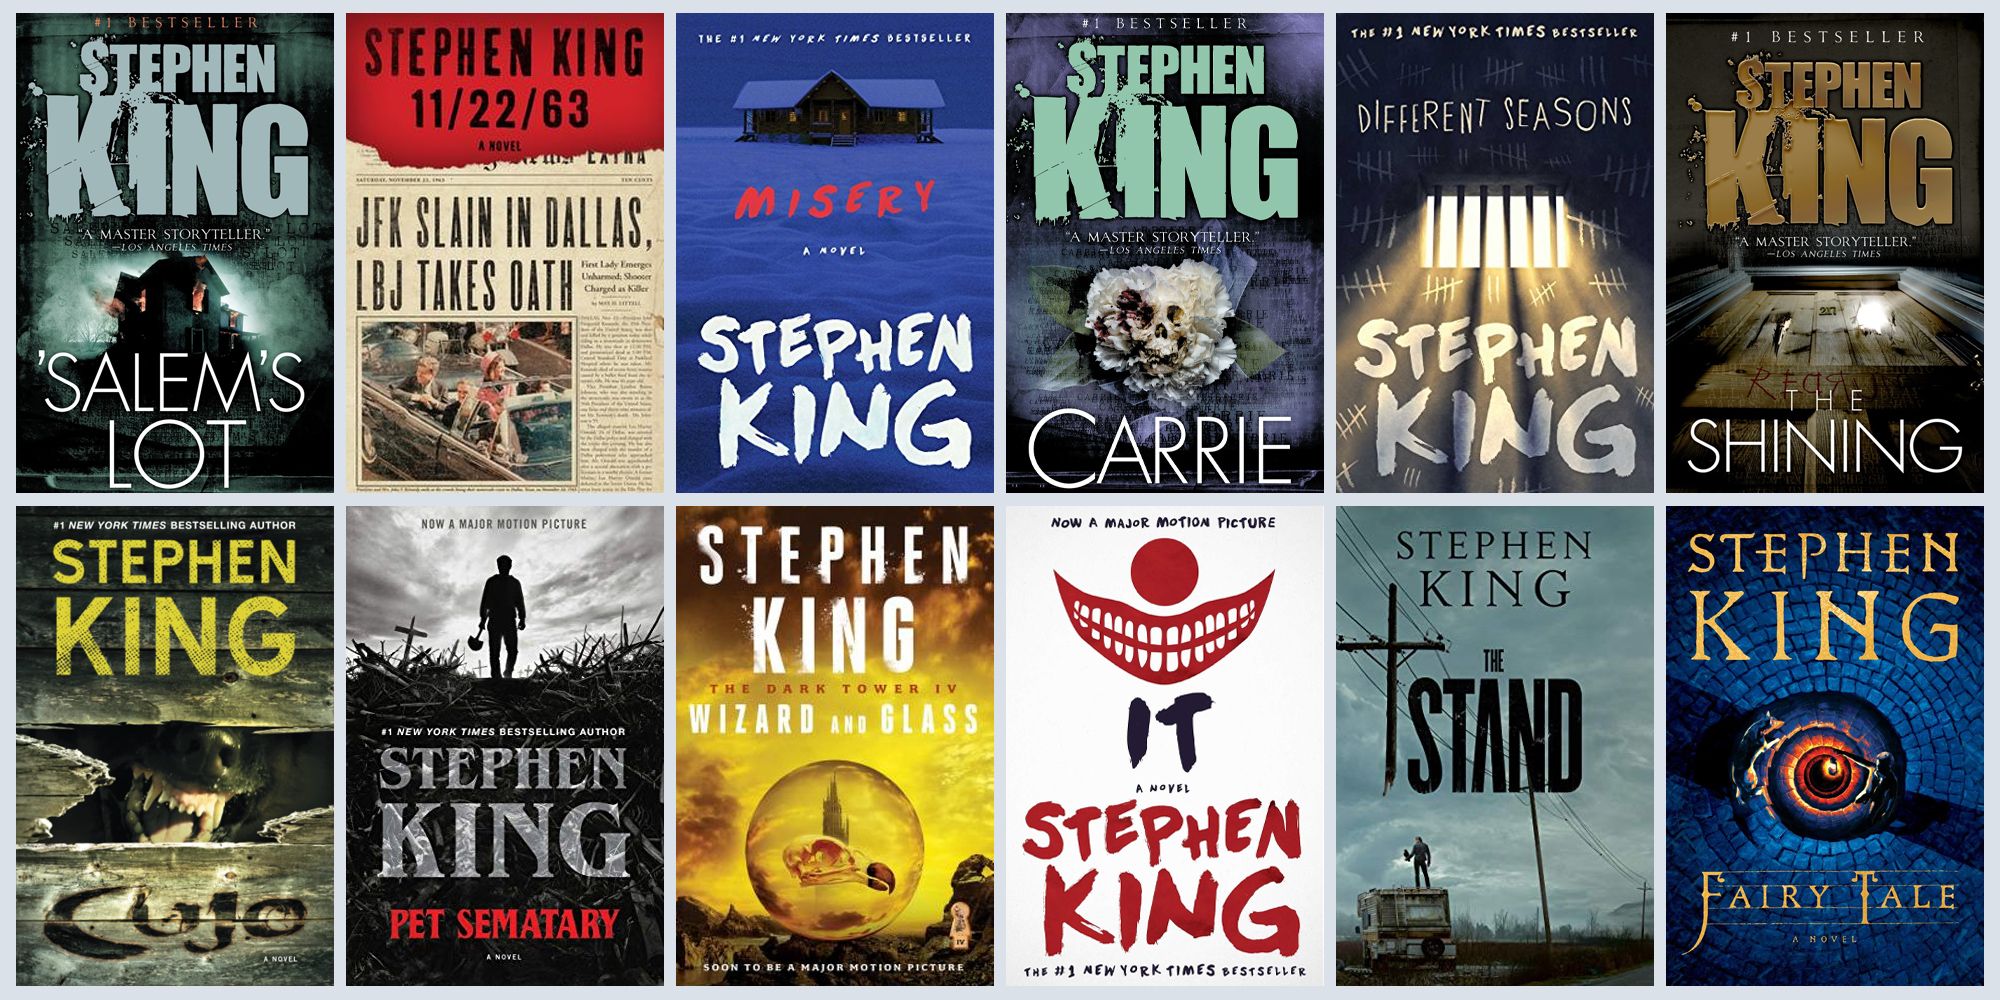 What is Stephen King's second best selling book?